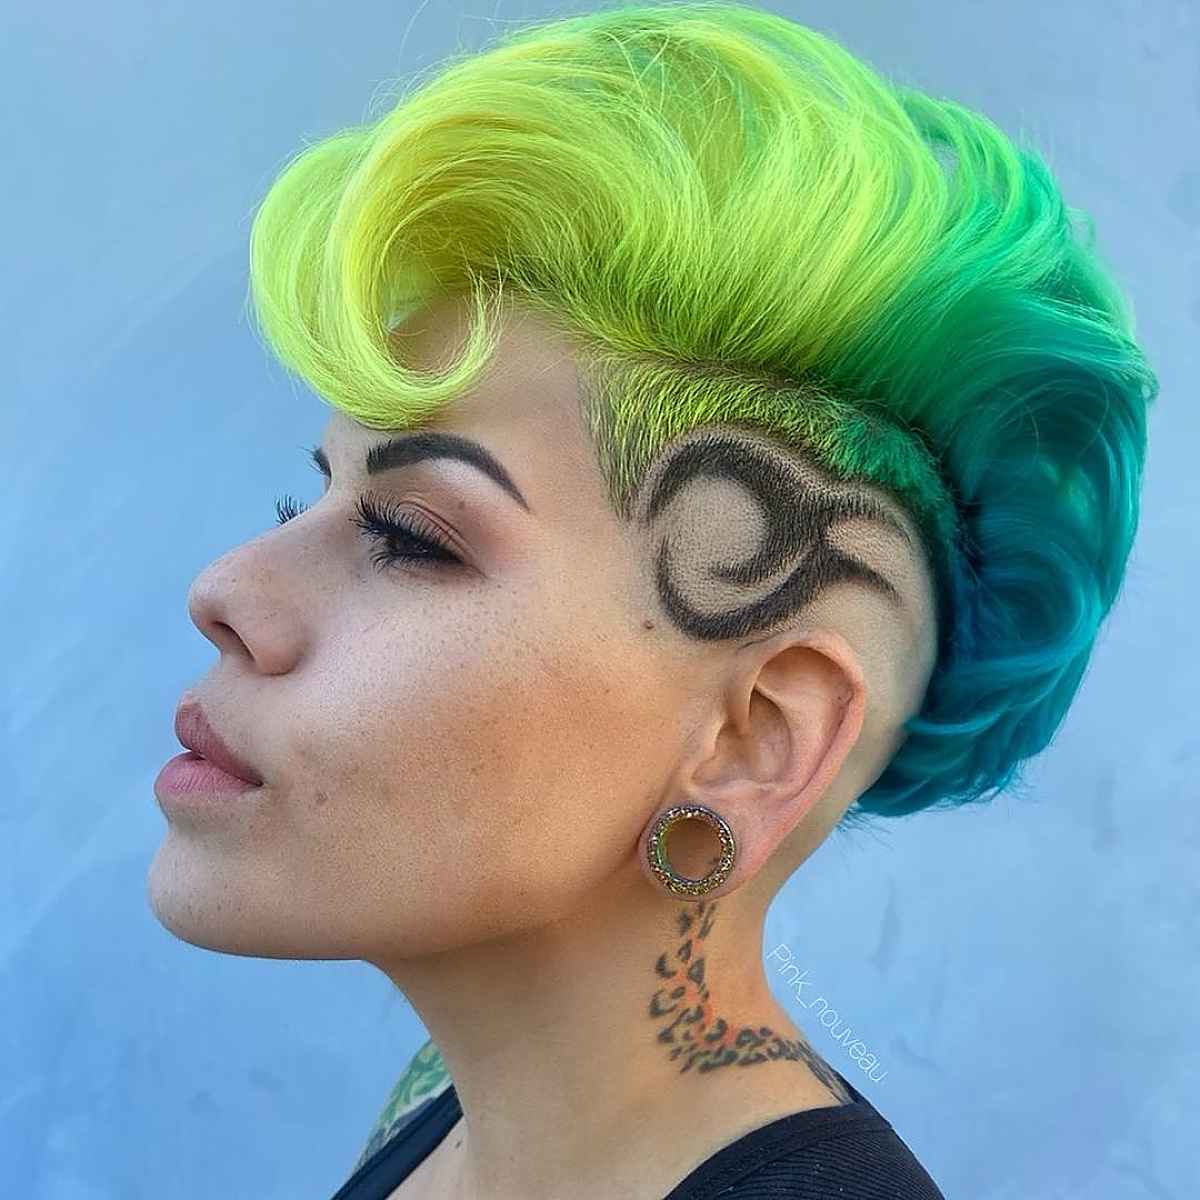 26 Hottest Alternative Hairstyles to Consider Right Now